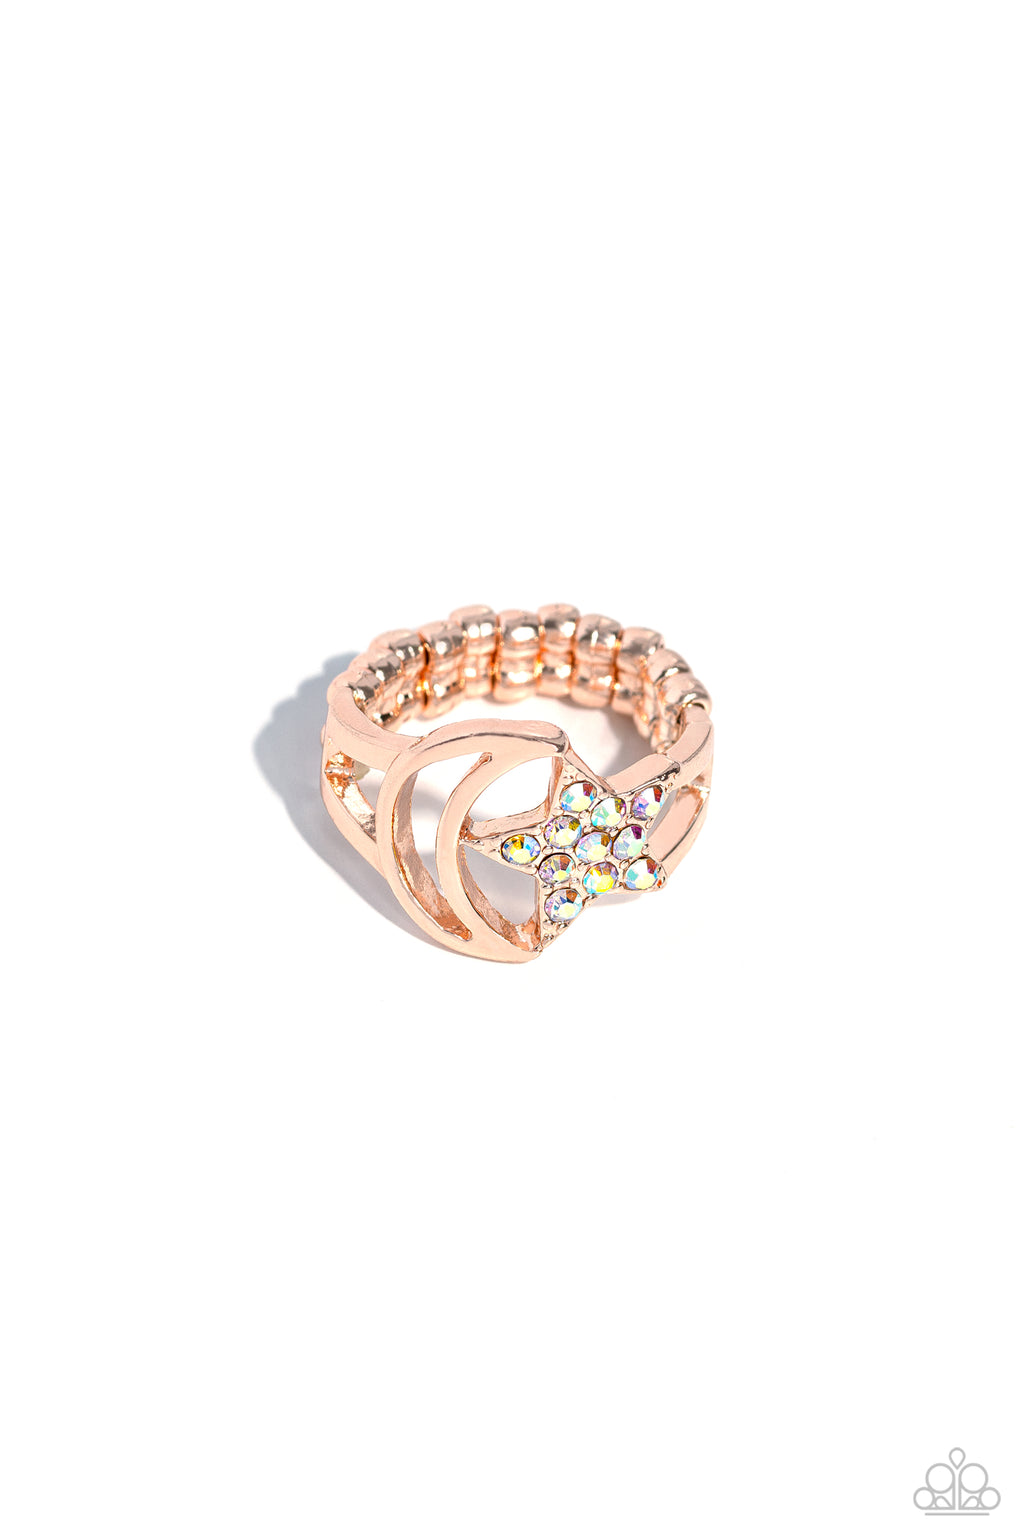 five-dollar-jewelry-stargazing-style-rose-gold-paparazzi-accessories